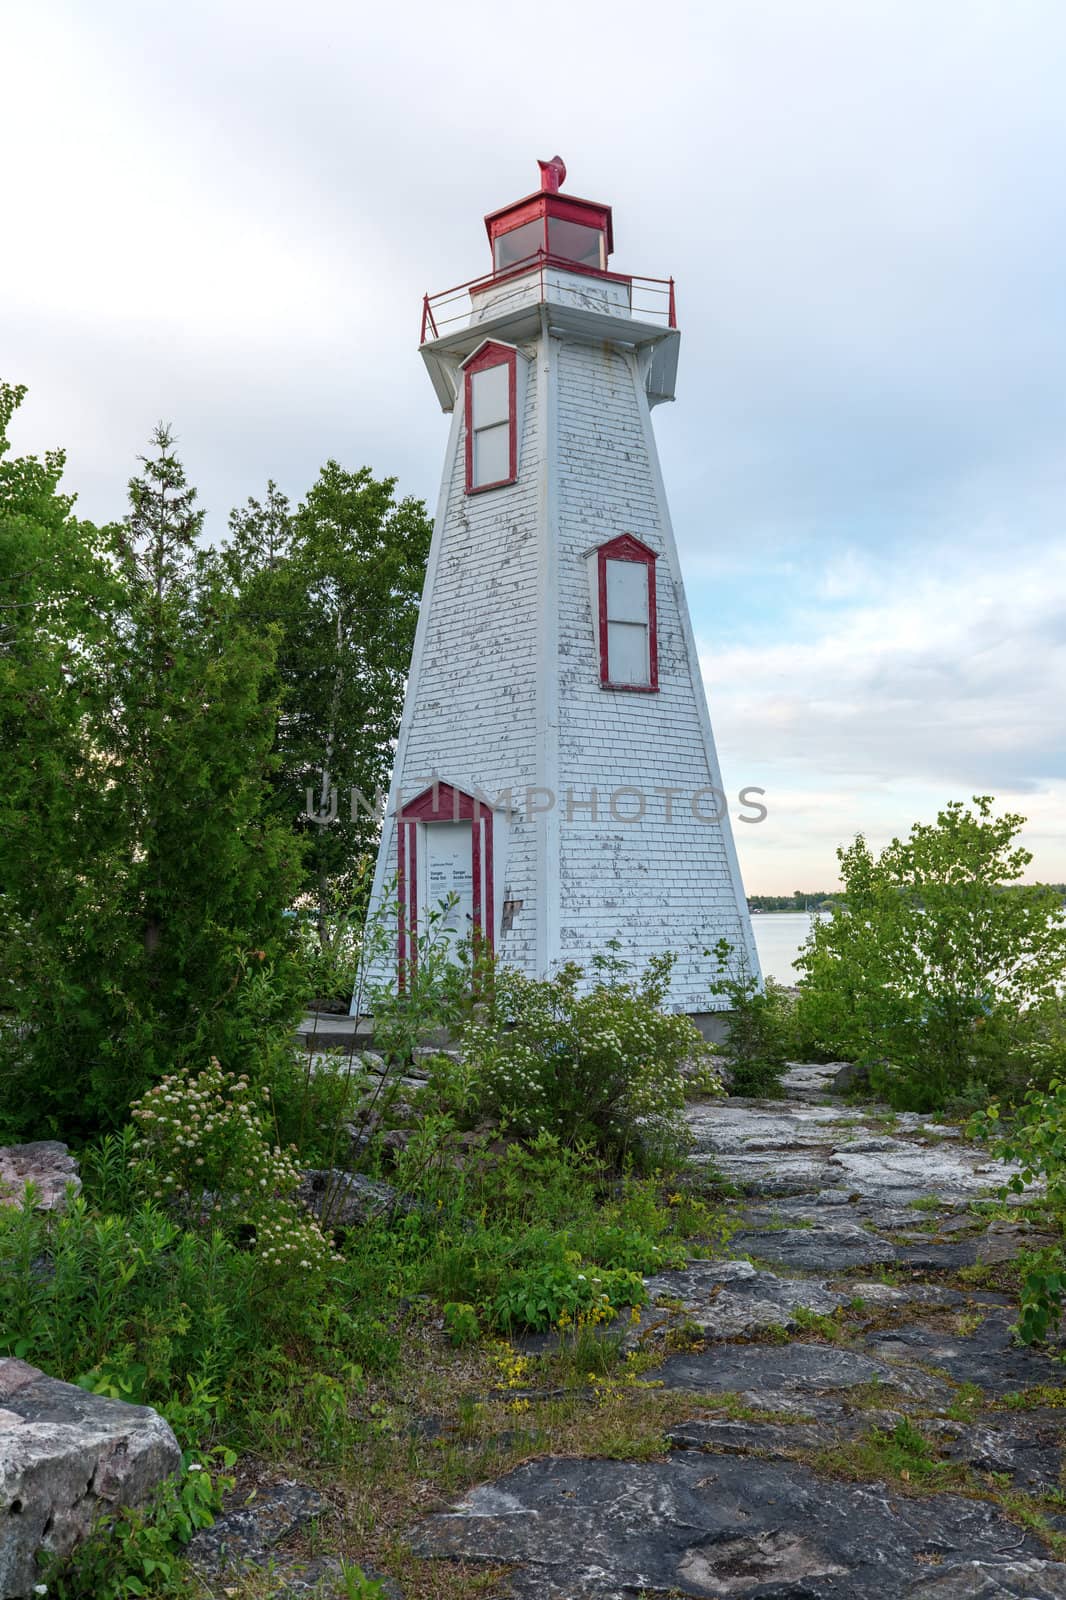 Big Tube Lighthouse in Tobermory Ontario was constructed in 1885. Played an important role guiding ships into the harbour from the waters of Lake Huron and Georgian Bay. The original structure was replaced by the six-sided, 14 meters wooden lighthouse that is seen today.